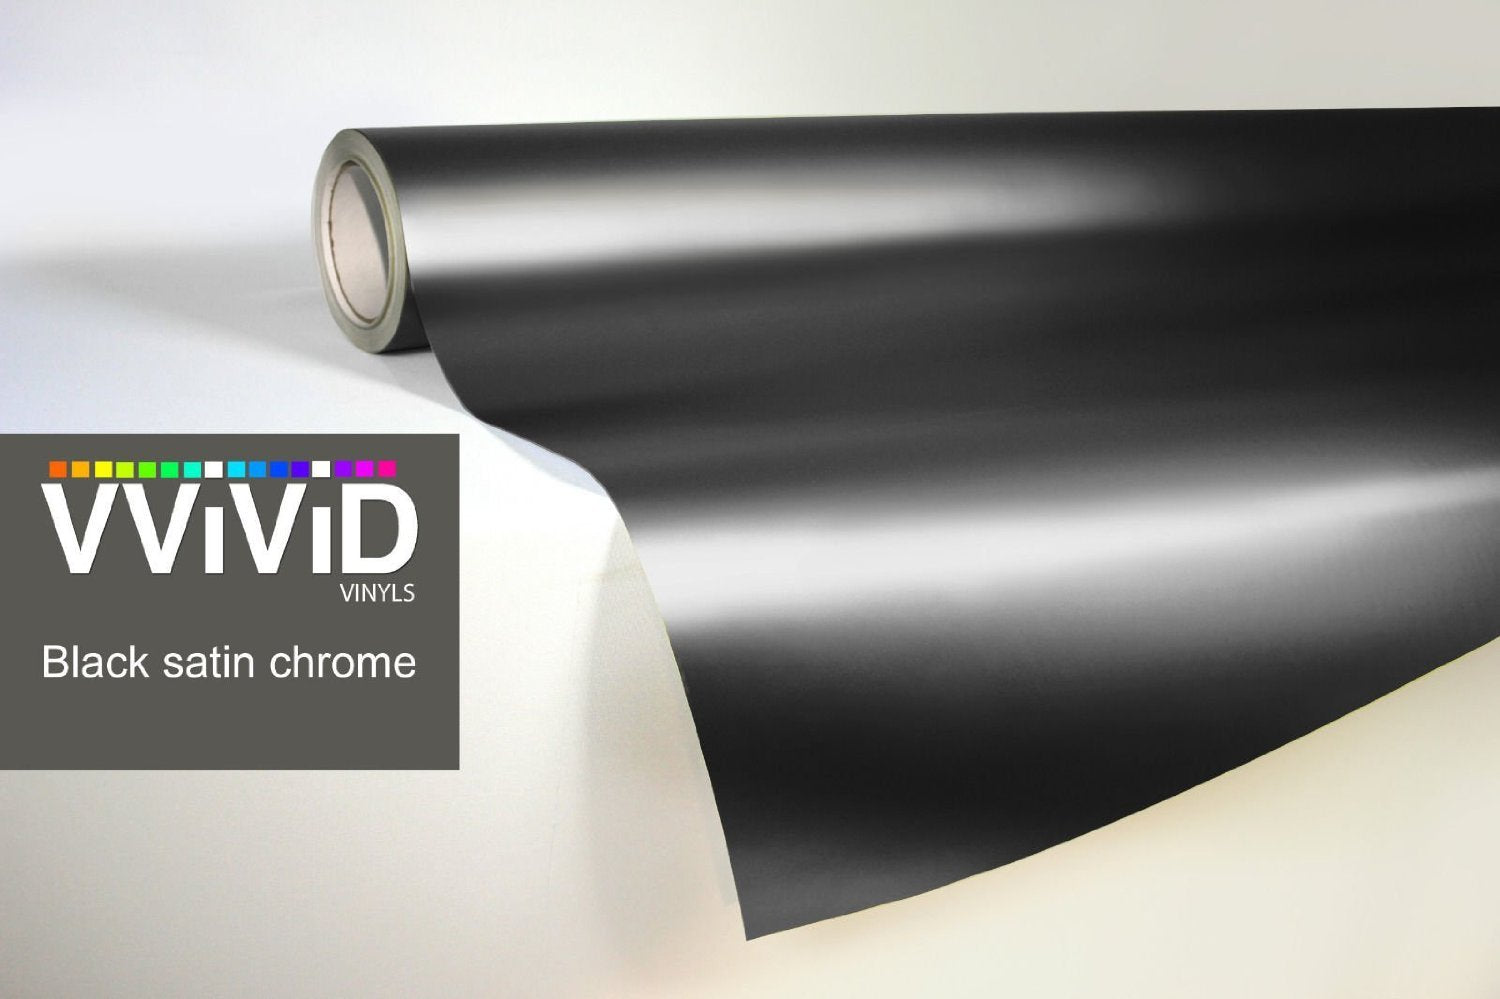 Black Satin Chrome Conformable Stretch Vinyl Wrap Roll with VViViD XPO Air Release Technology - 3ft x 5ft